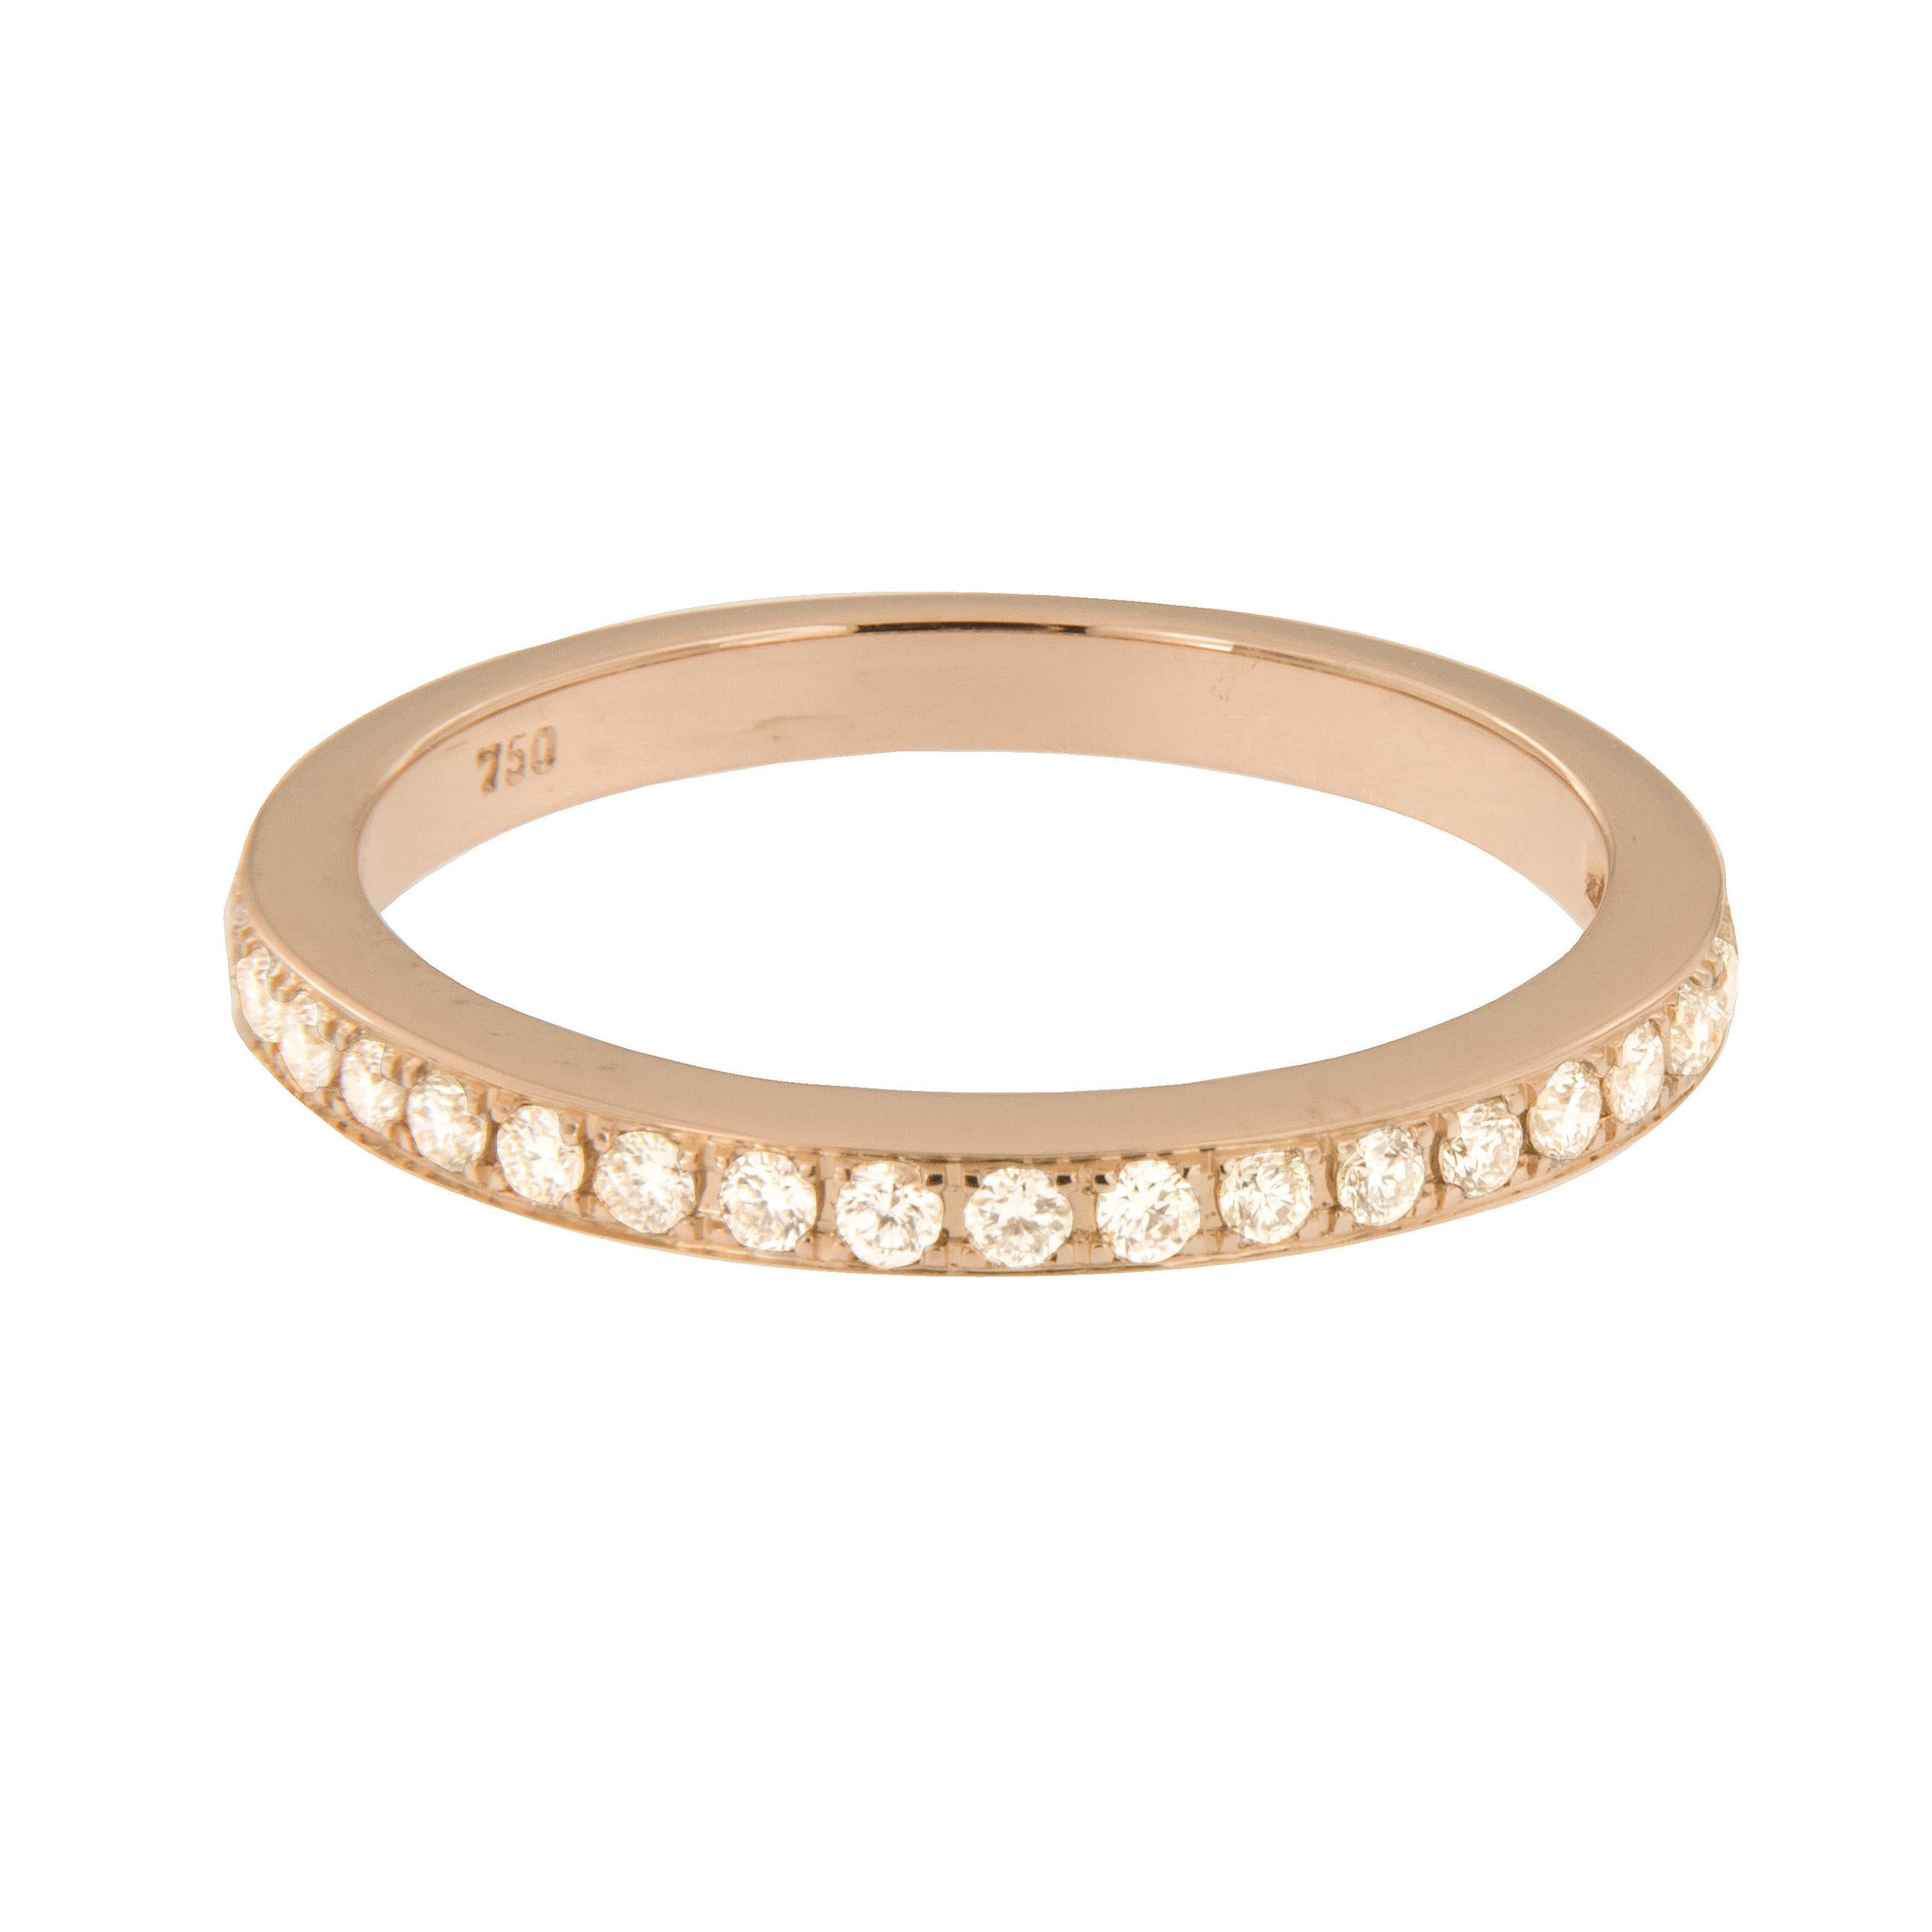 Beautiful white diamonds accent the top of this Swiss Made 18 karat rose gold band that can be worn alone or also looks fantastic stacked! This timeless ring can be cherished & passed down with 21 round brilliant cut diamonds = 0.19 Cttw. Size